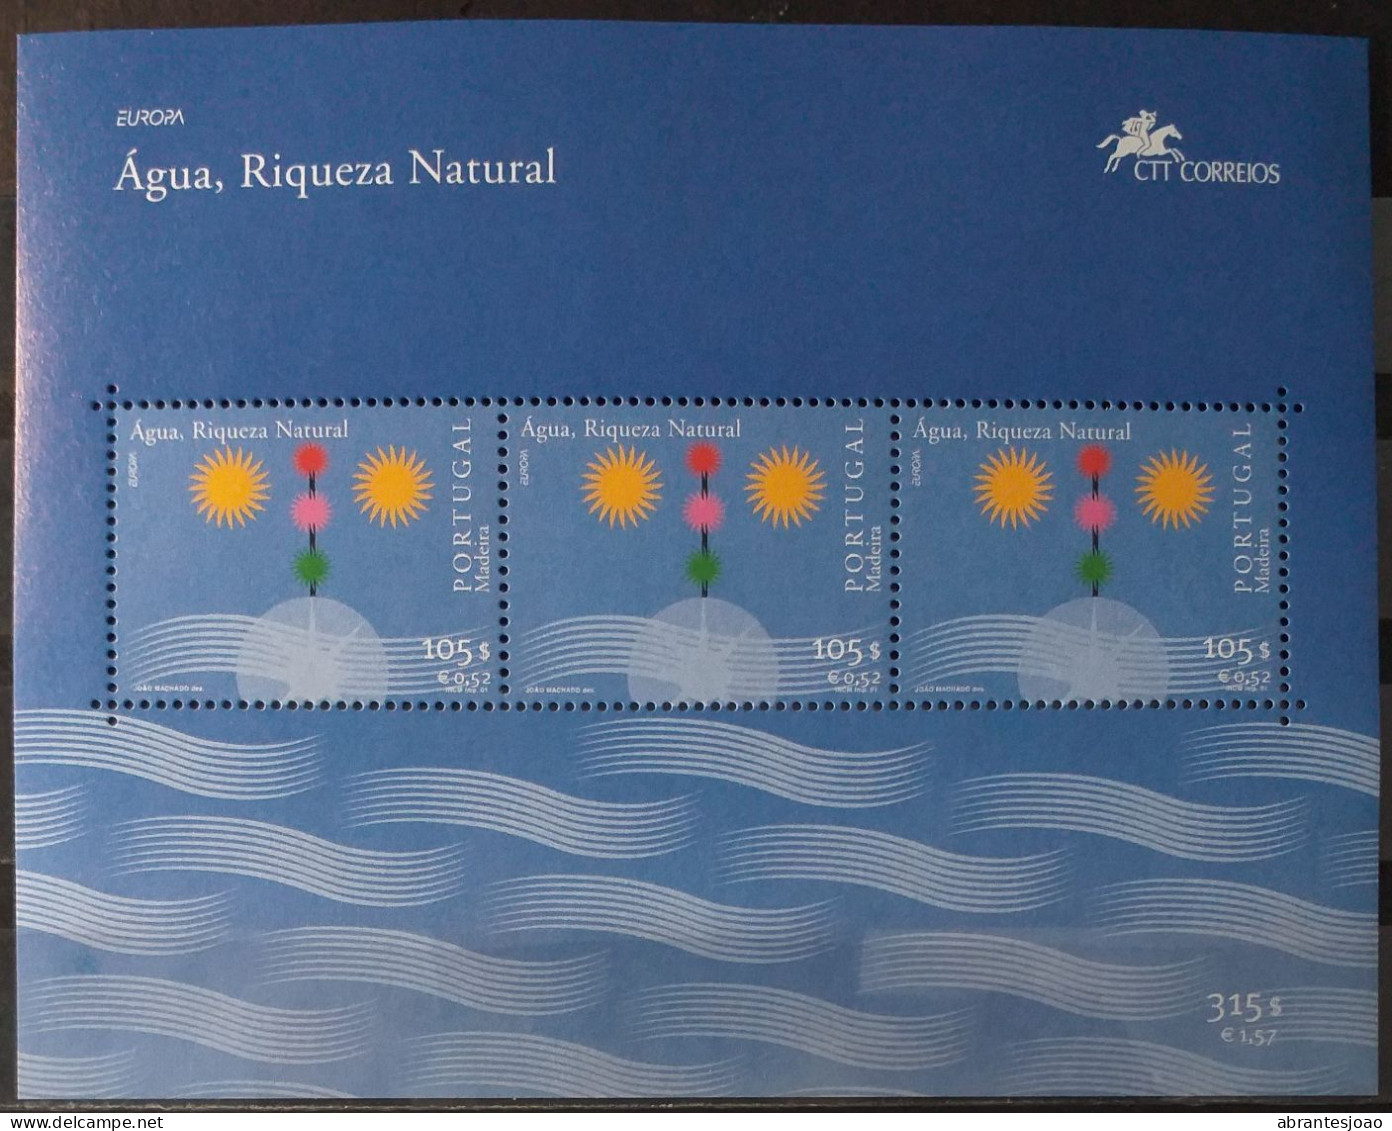 2001 - Portugal - MNH - Europa - Water, Natural Richness - Madeira - 1 Stamp + Souvenir Sheet Of 3 Stamps - Neufs